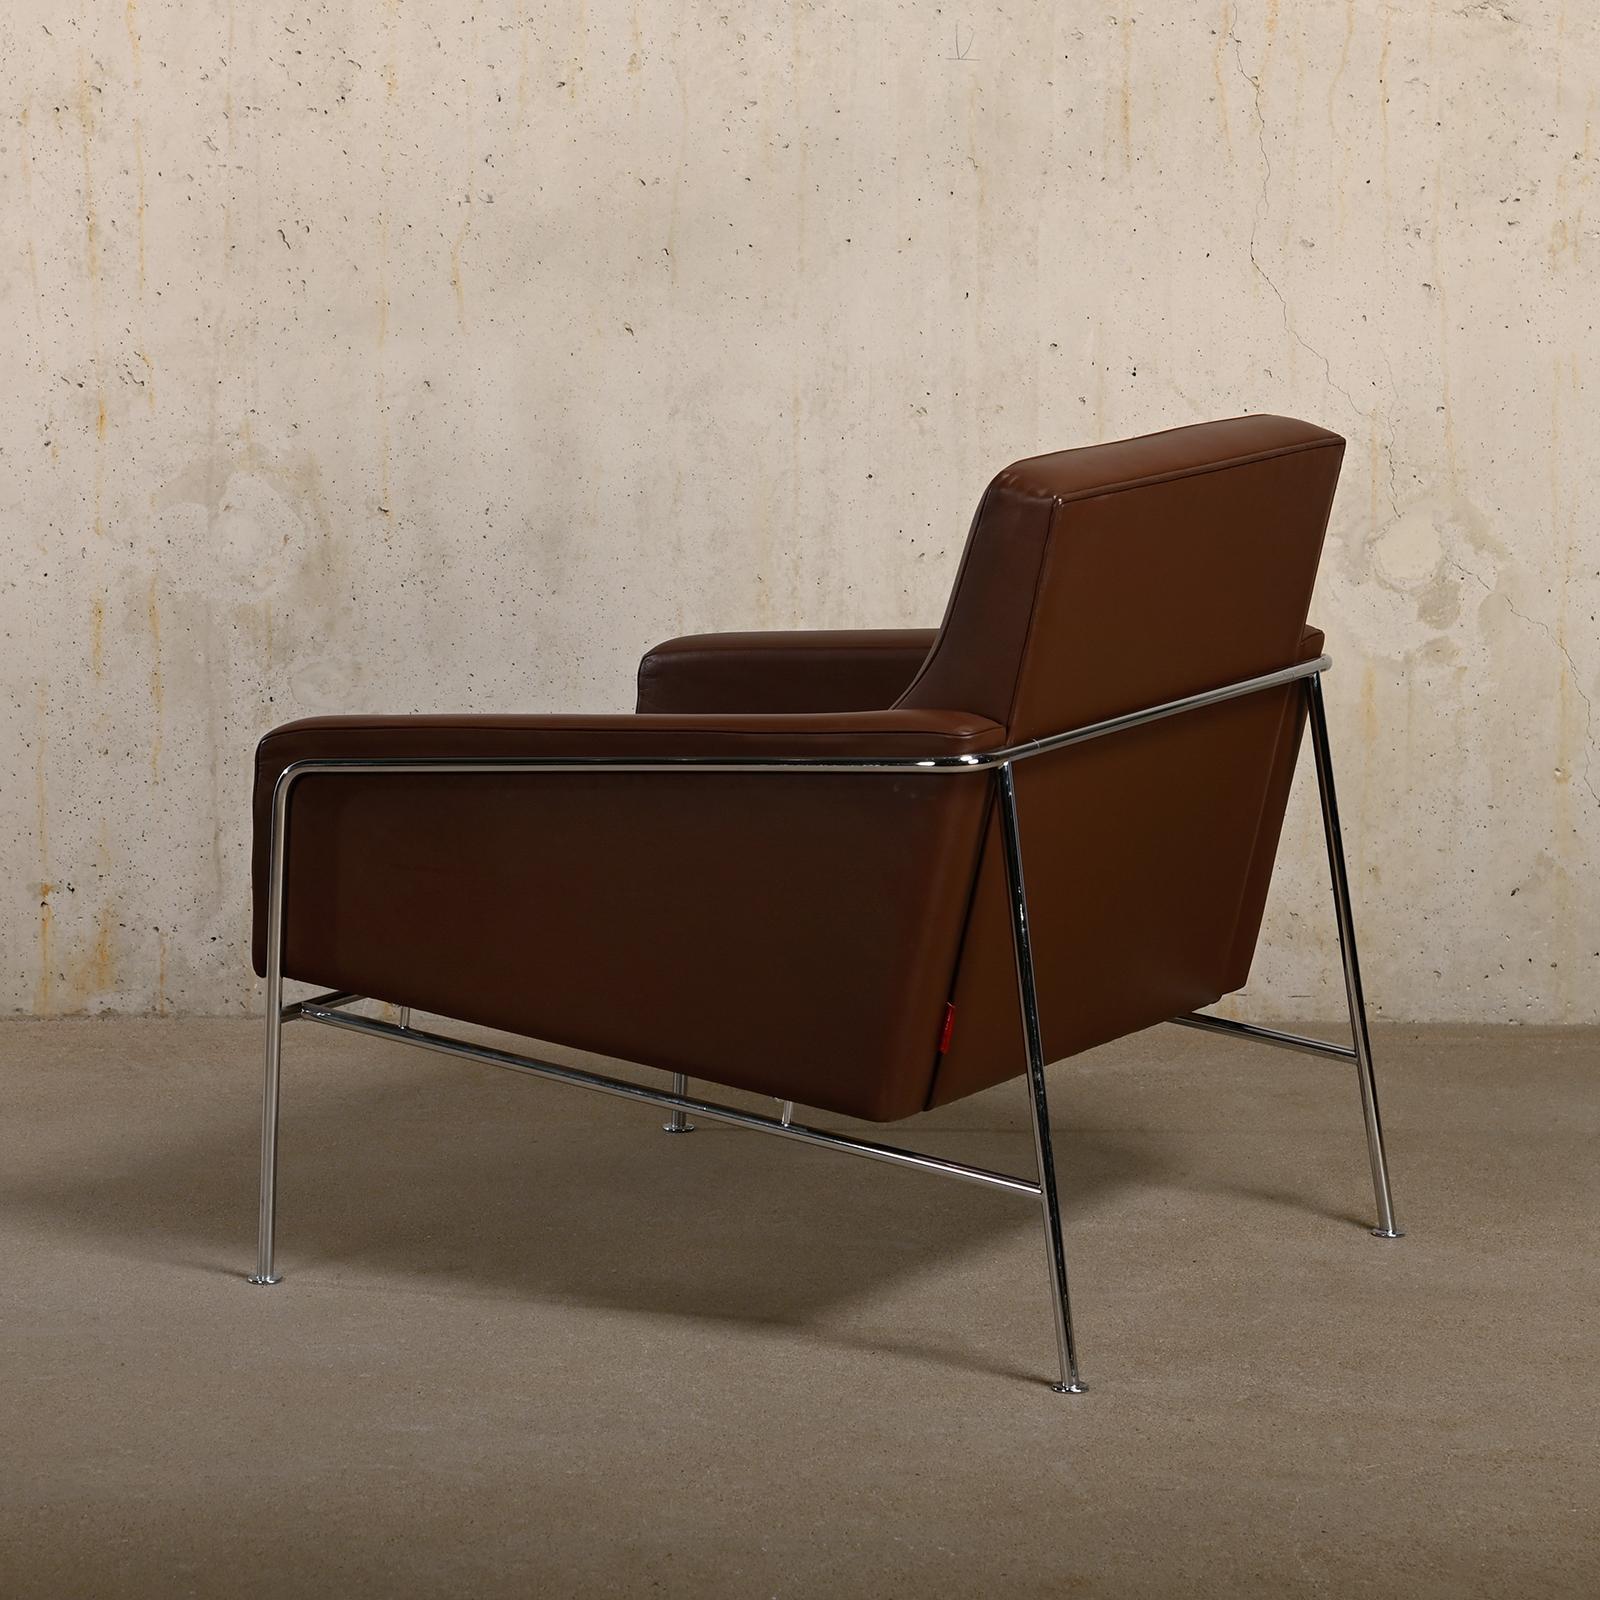 Arne Jacobsen Lounge Chair 3300 Series in Chestnut leather for Fritz Hansen In Good Condition For Sale In Amsterdam, NL